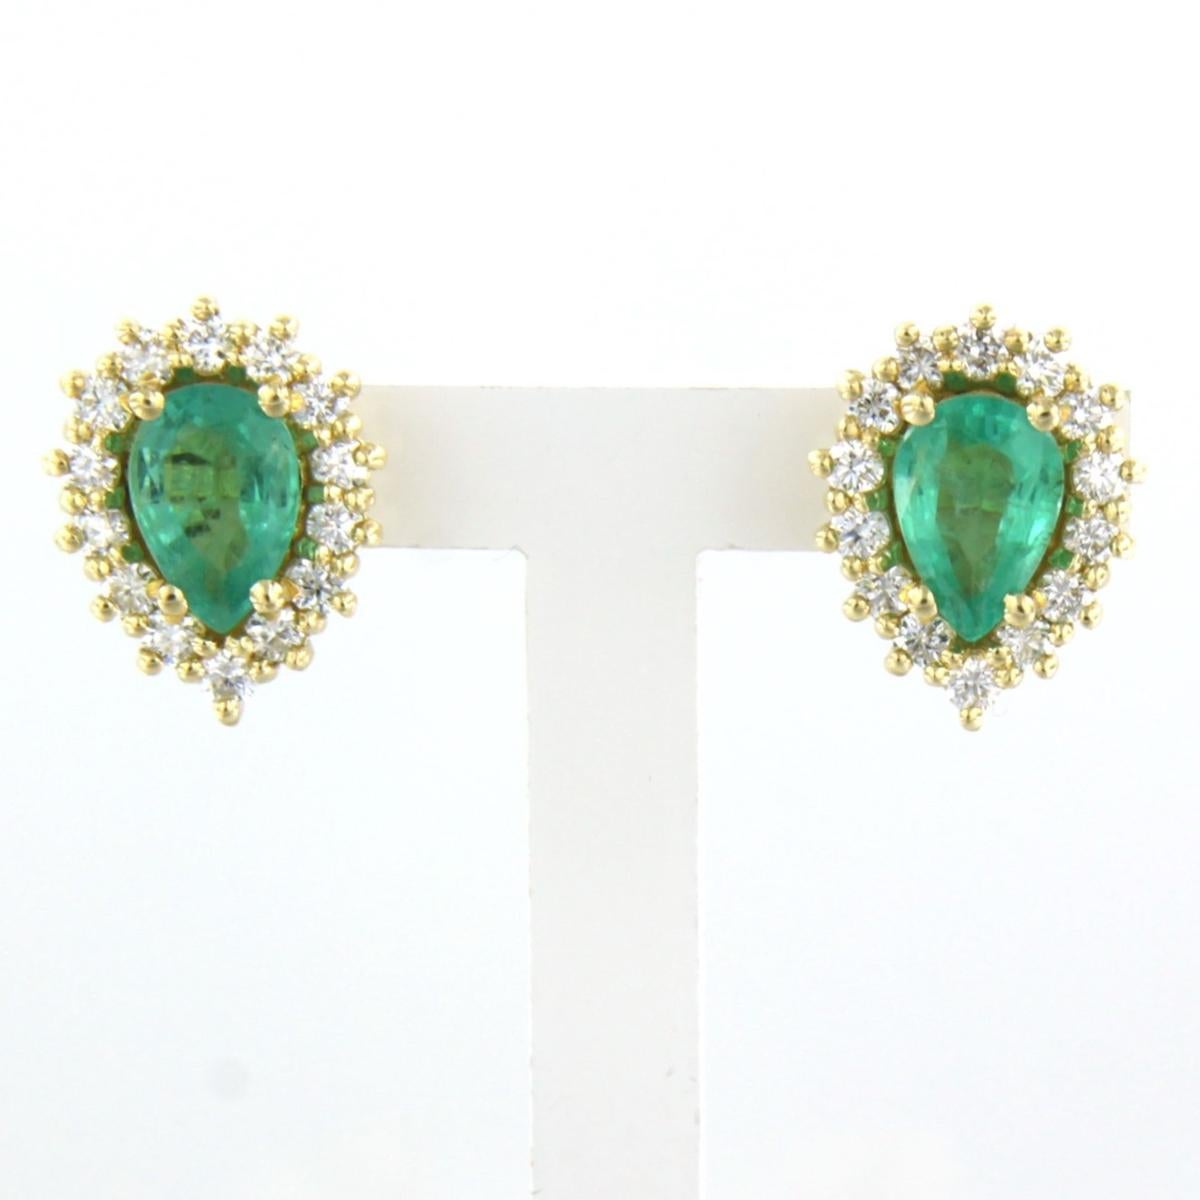 18k yellow gold entourage stud earrings set with emerald to. 1.10ct and an entourage of brilliant cut diamonds up to. 0.50ct - F/G - VS/SI

Detailed description:

the size of the ear stud is 1.2 cm long by 9.7 mm wide

weight 4.7 grams

occupied